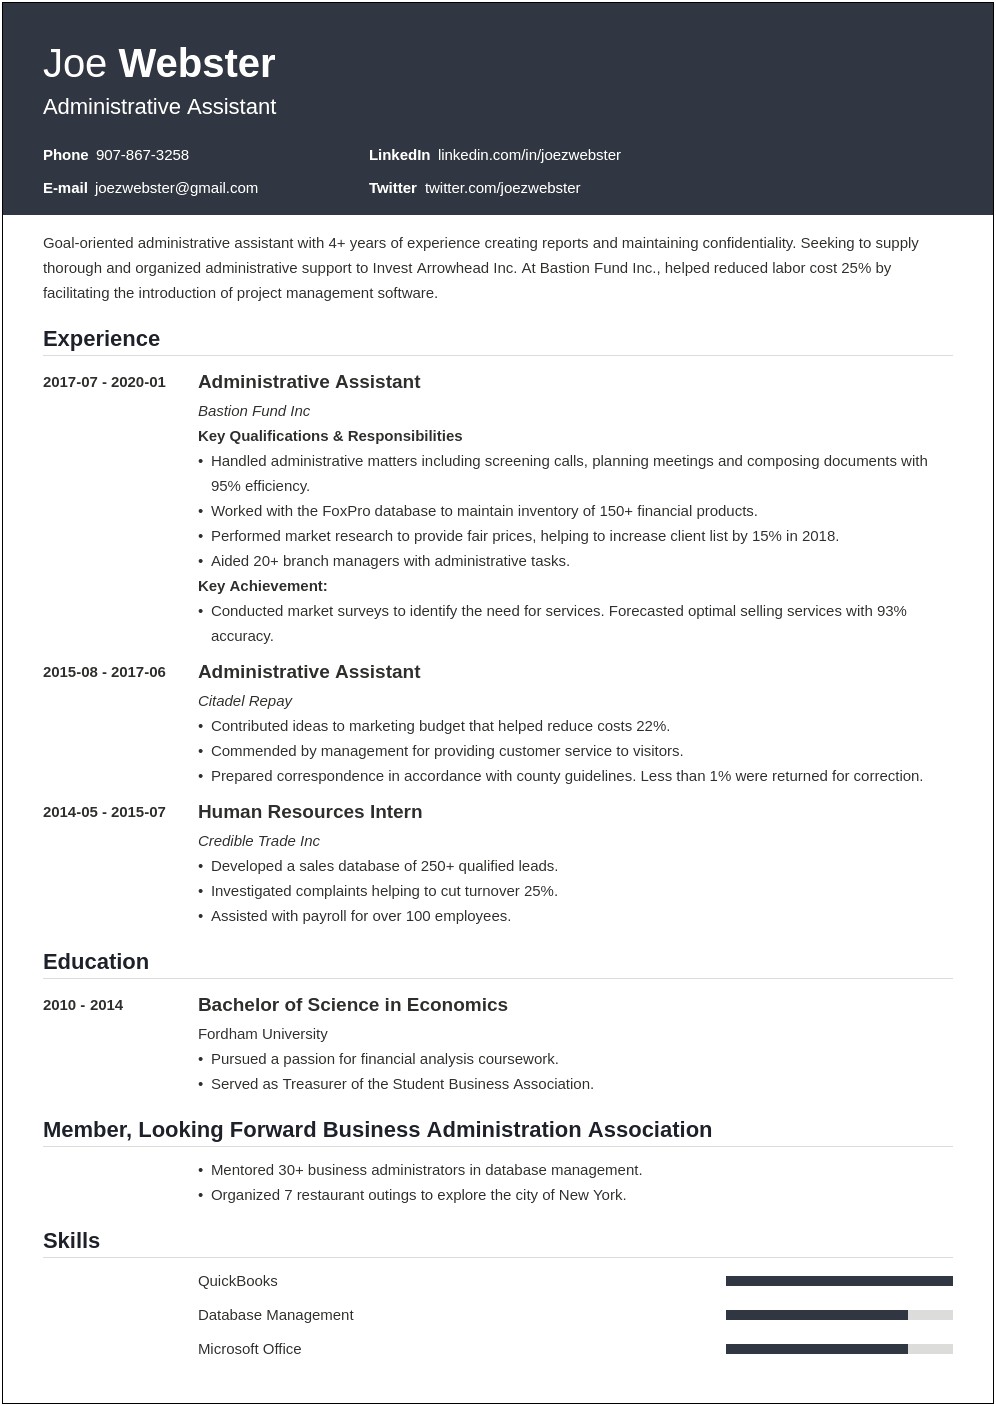 Brief Resume Intro For Business Management